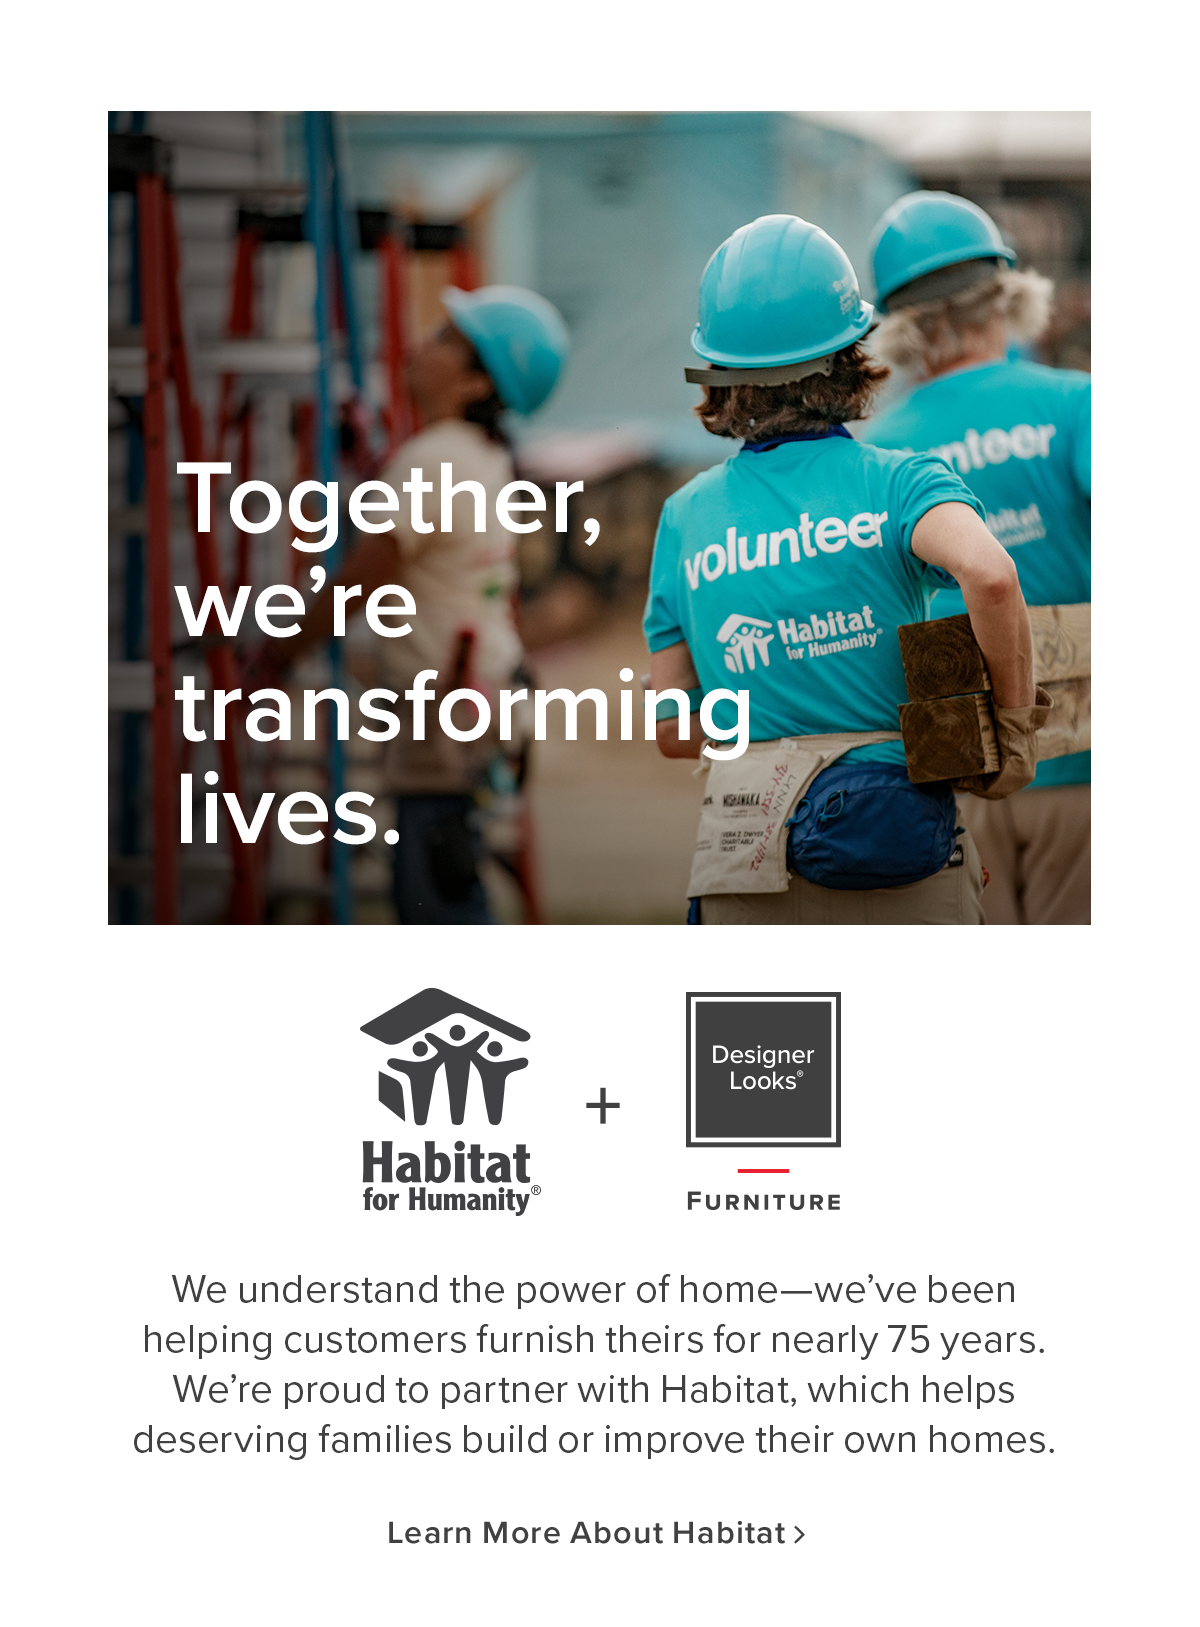 Together, we're transforming lives. | Learn More About Habitat for Humanity